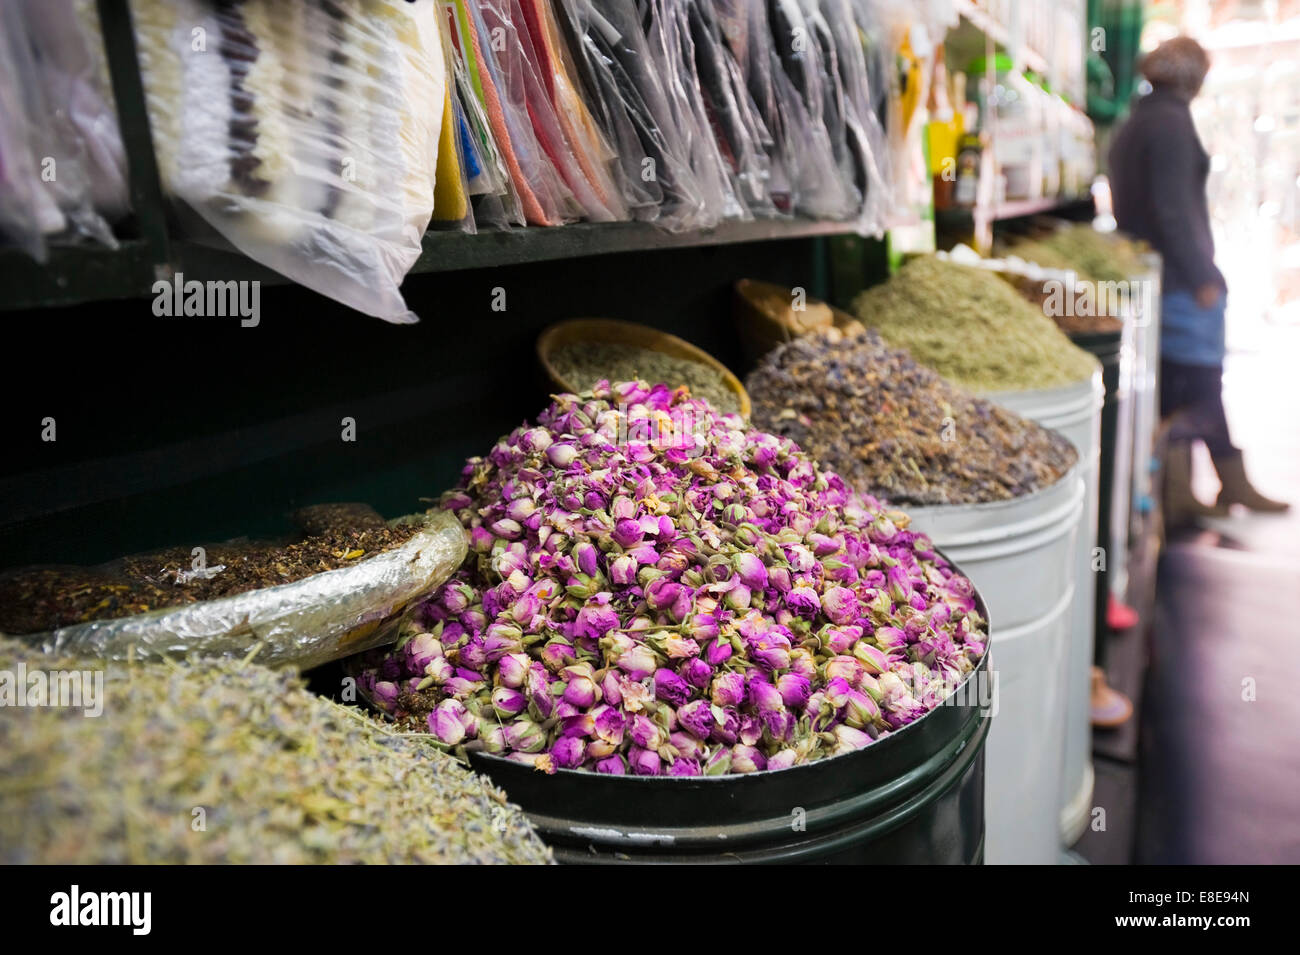 Horizontal close up of a shop full of herbs and spices in the souks of Marrakech. Stock Photo